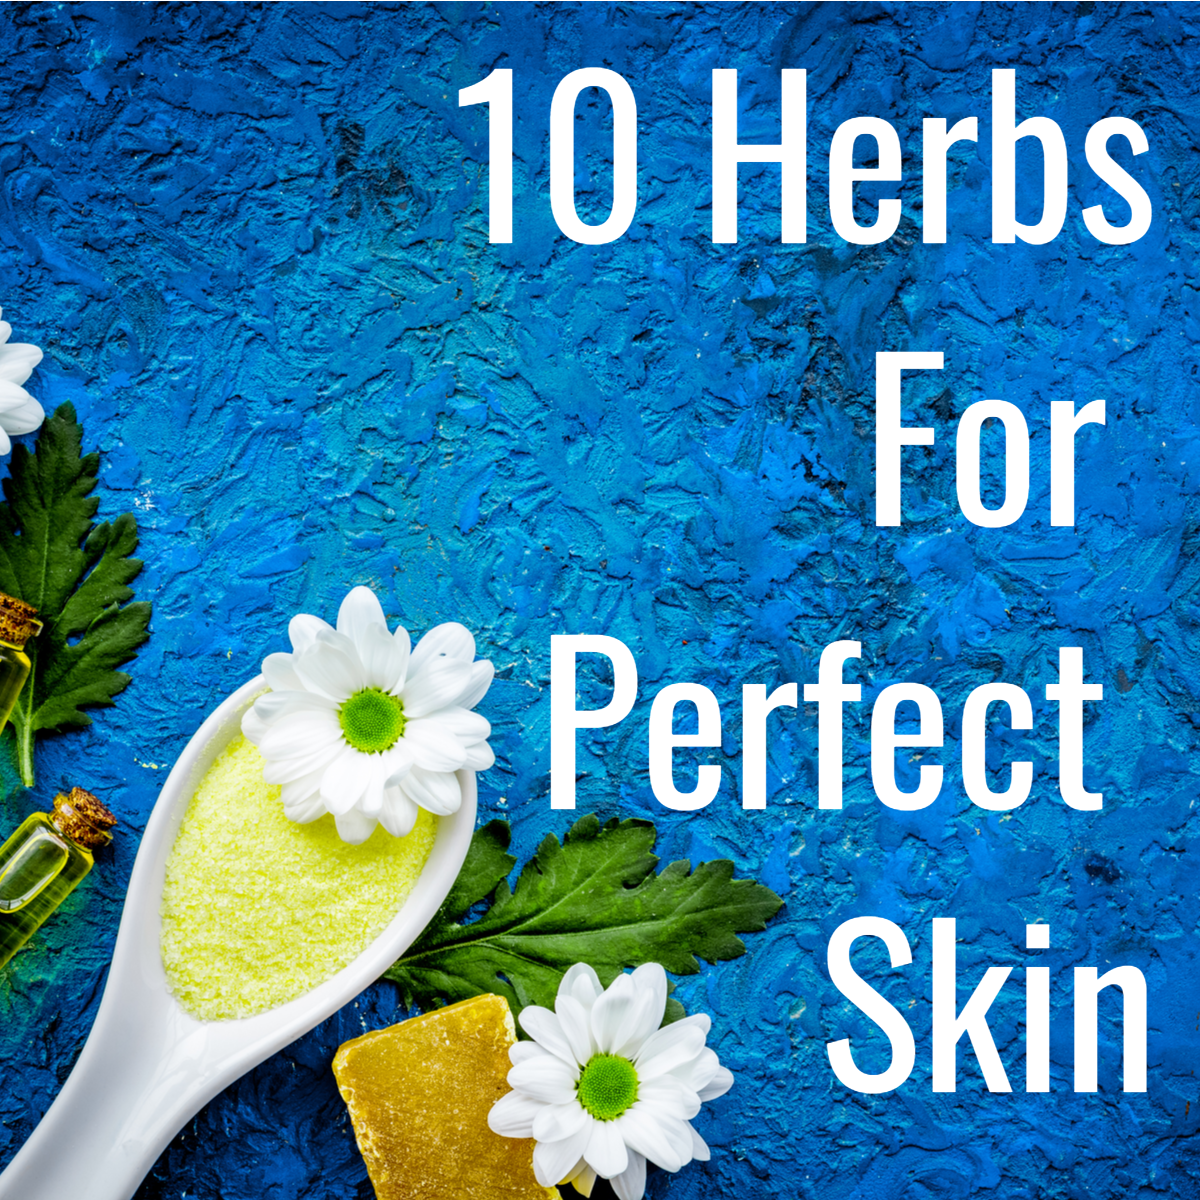 10 herbs for perfect skin